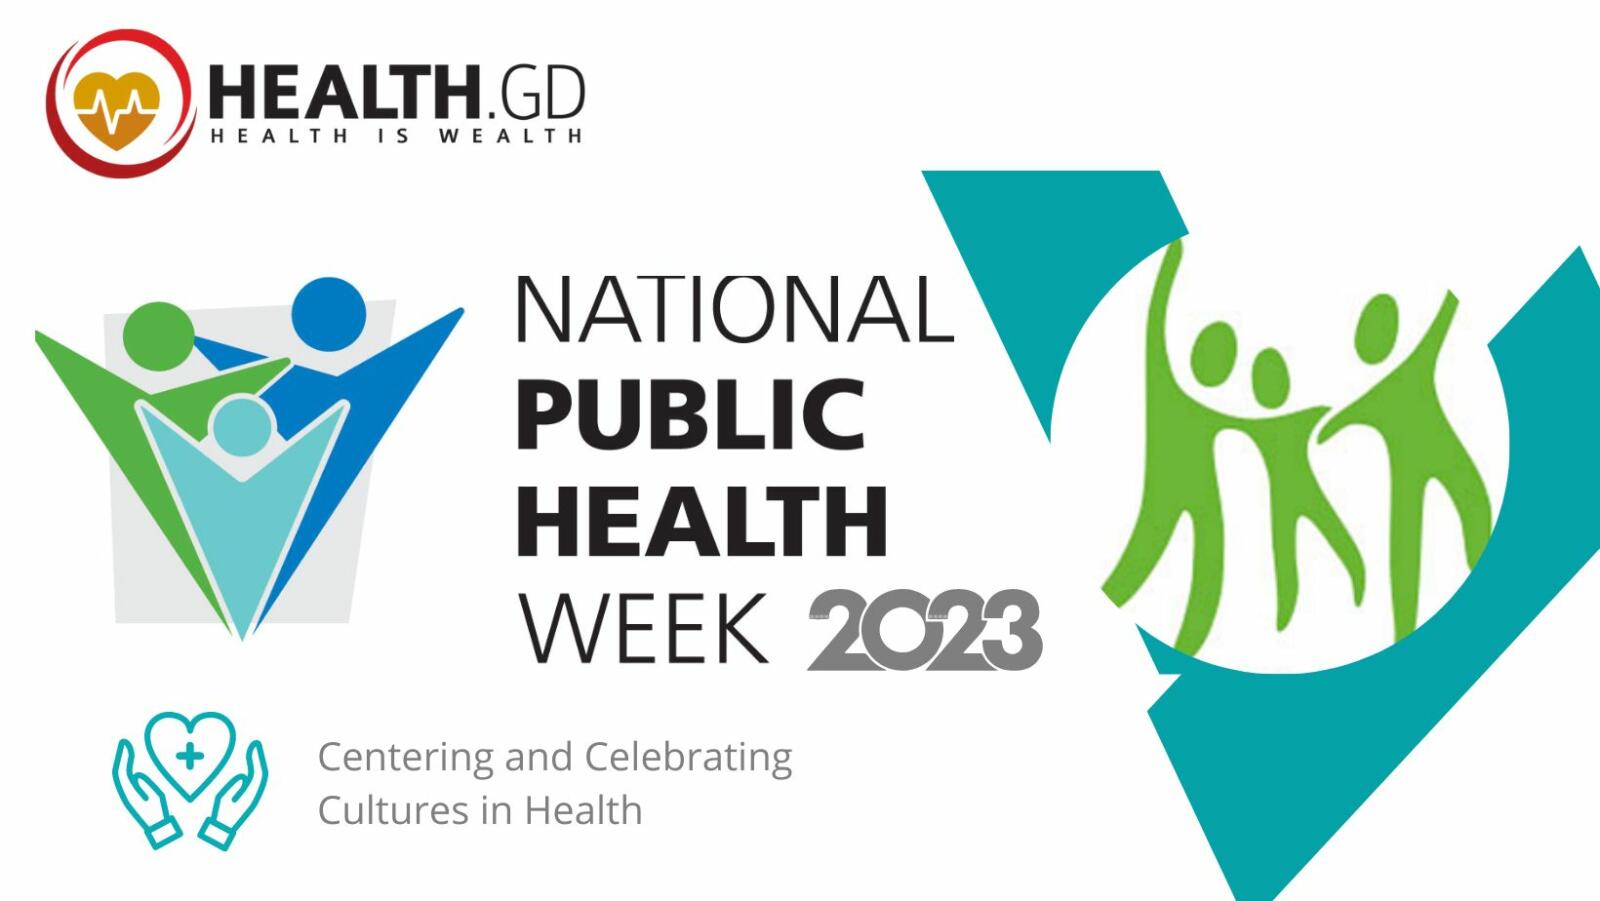 How Do I Get Involved In National Public Health Week 2023? Health.Gd